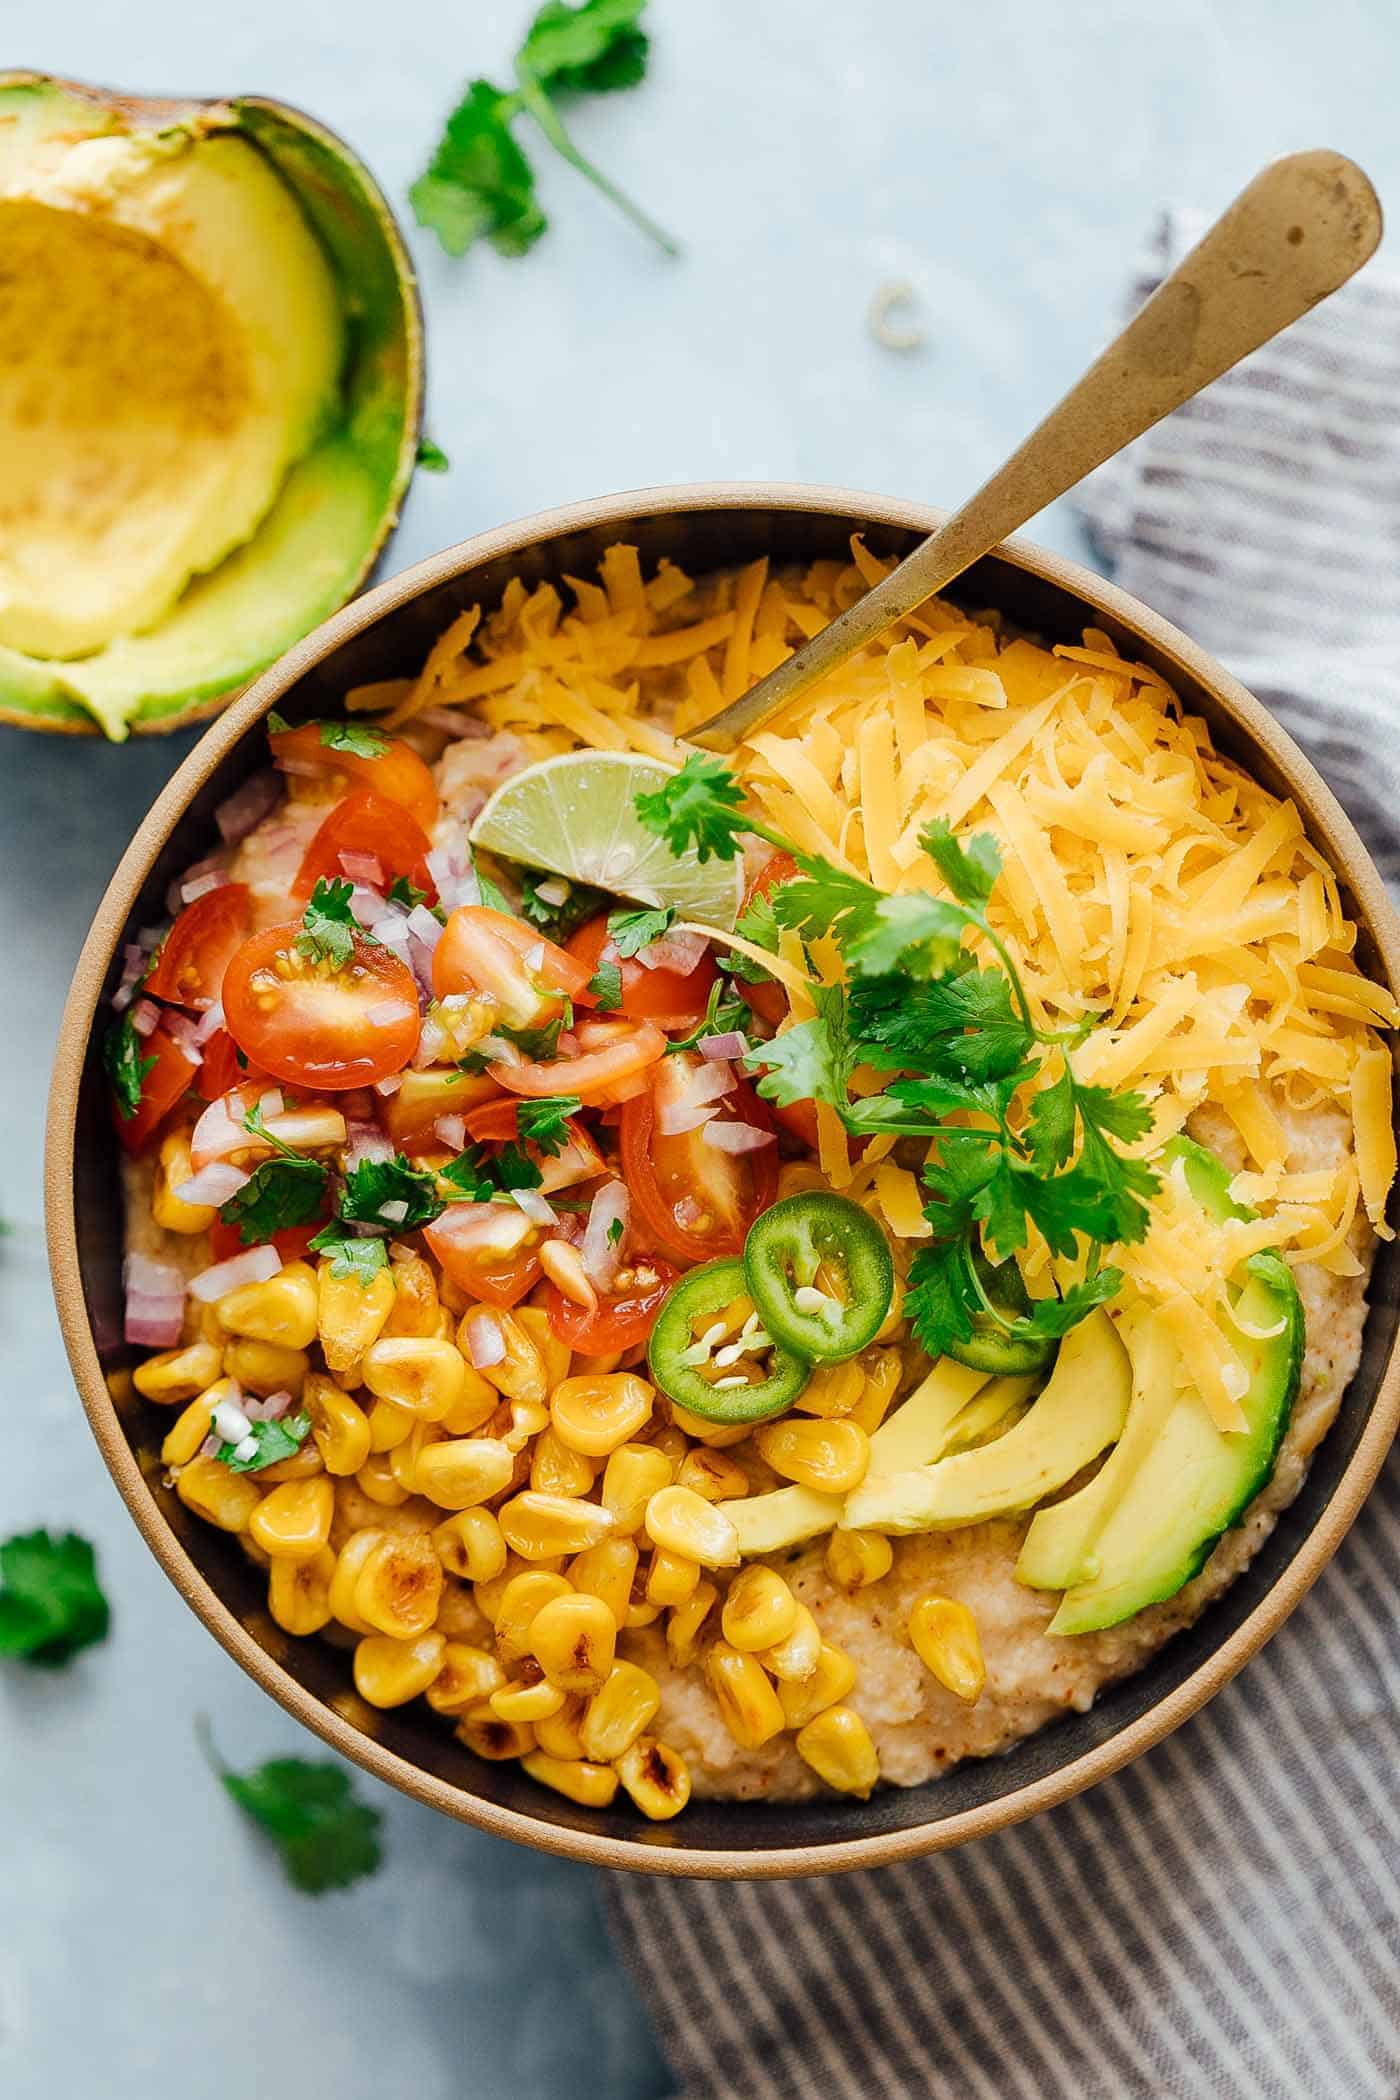 This Mexican oatmeal bowl is the healthier version of a Mexican breakfast bowl. The oatmeal is seasoned with all the spices that go into your favorite taco, and then topped with salsa, corn, avocado, jalapenos and cheddar. Super simple to make but you’ll feel like a king when you dig into this!